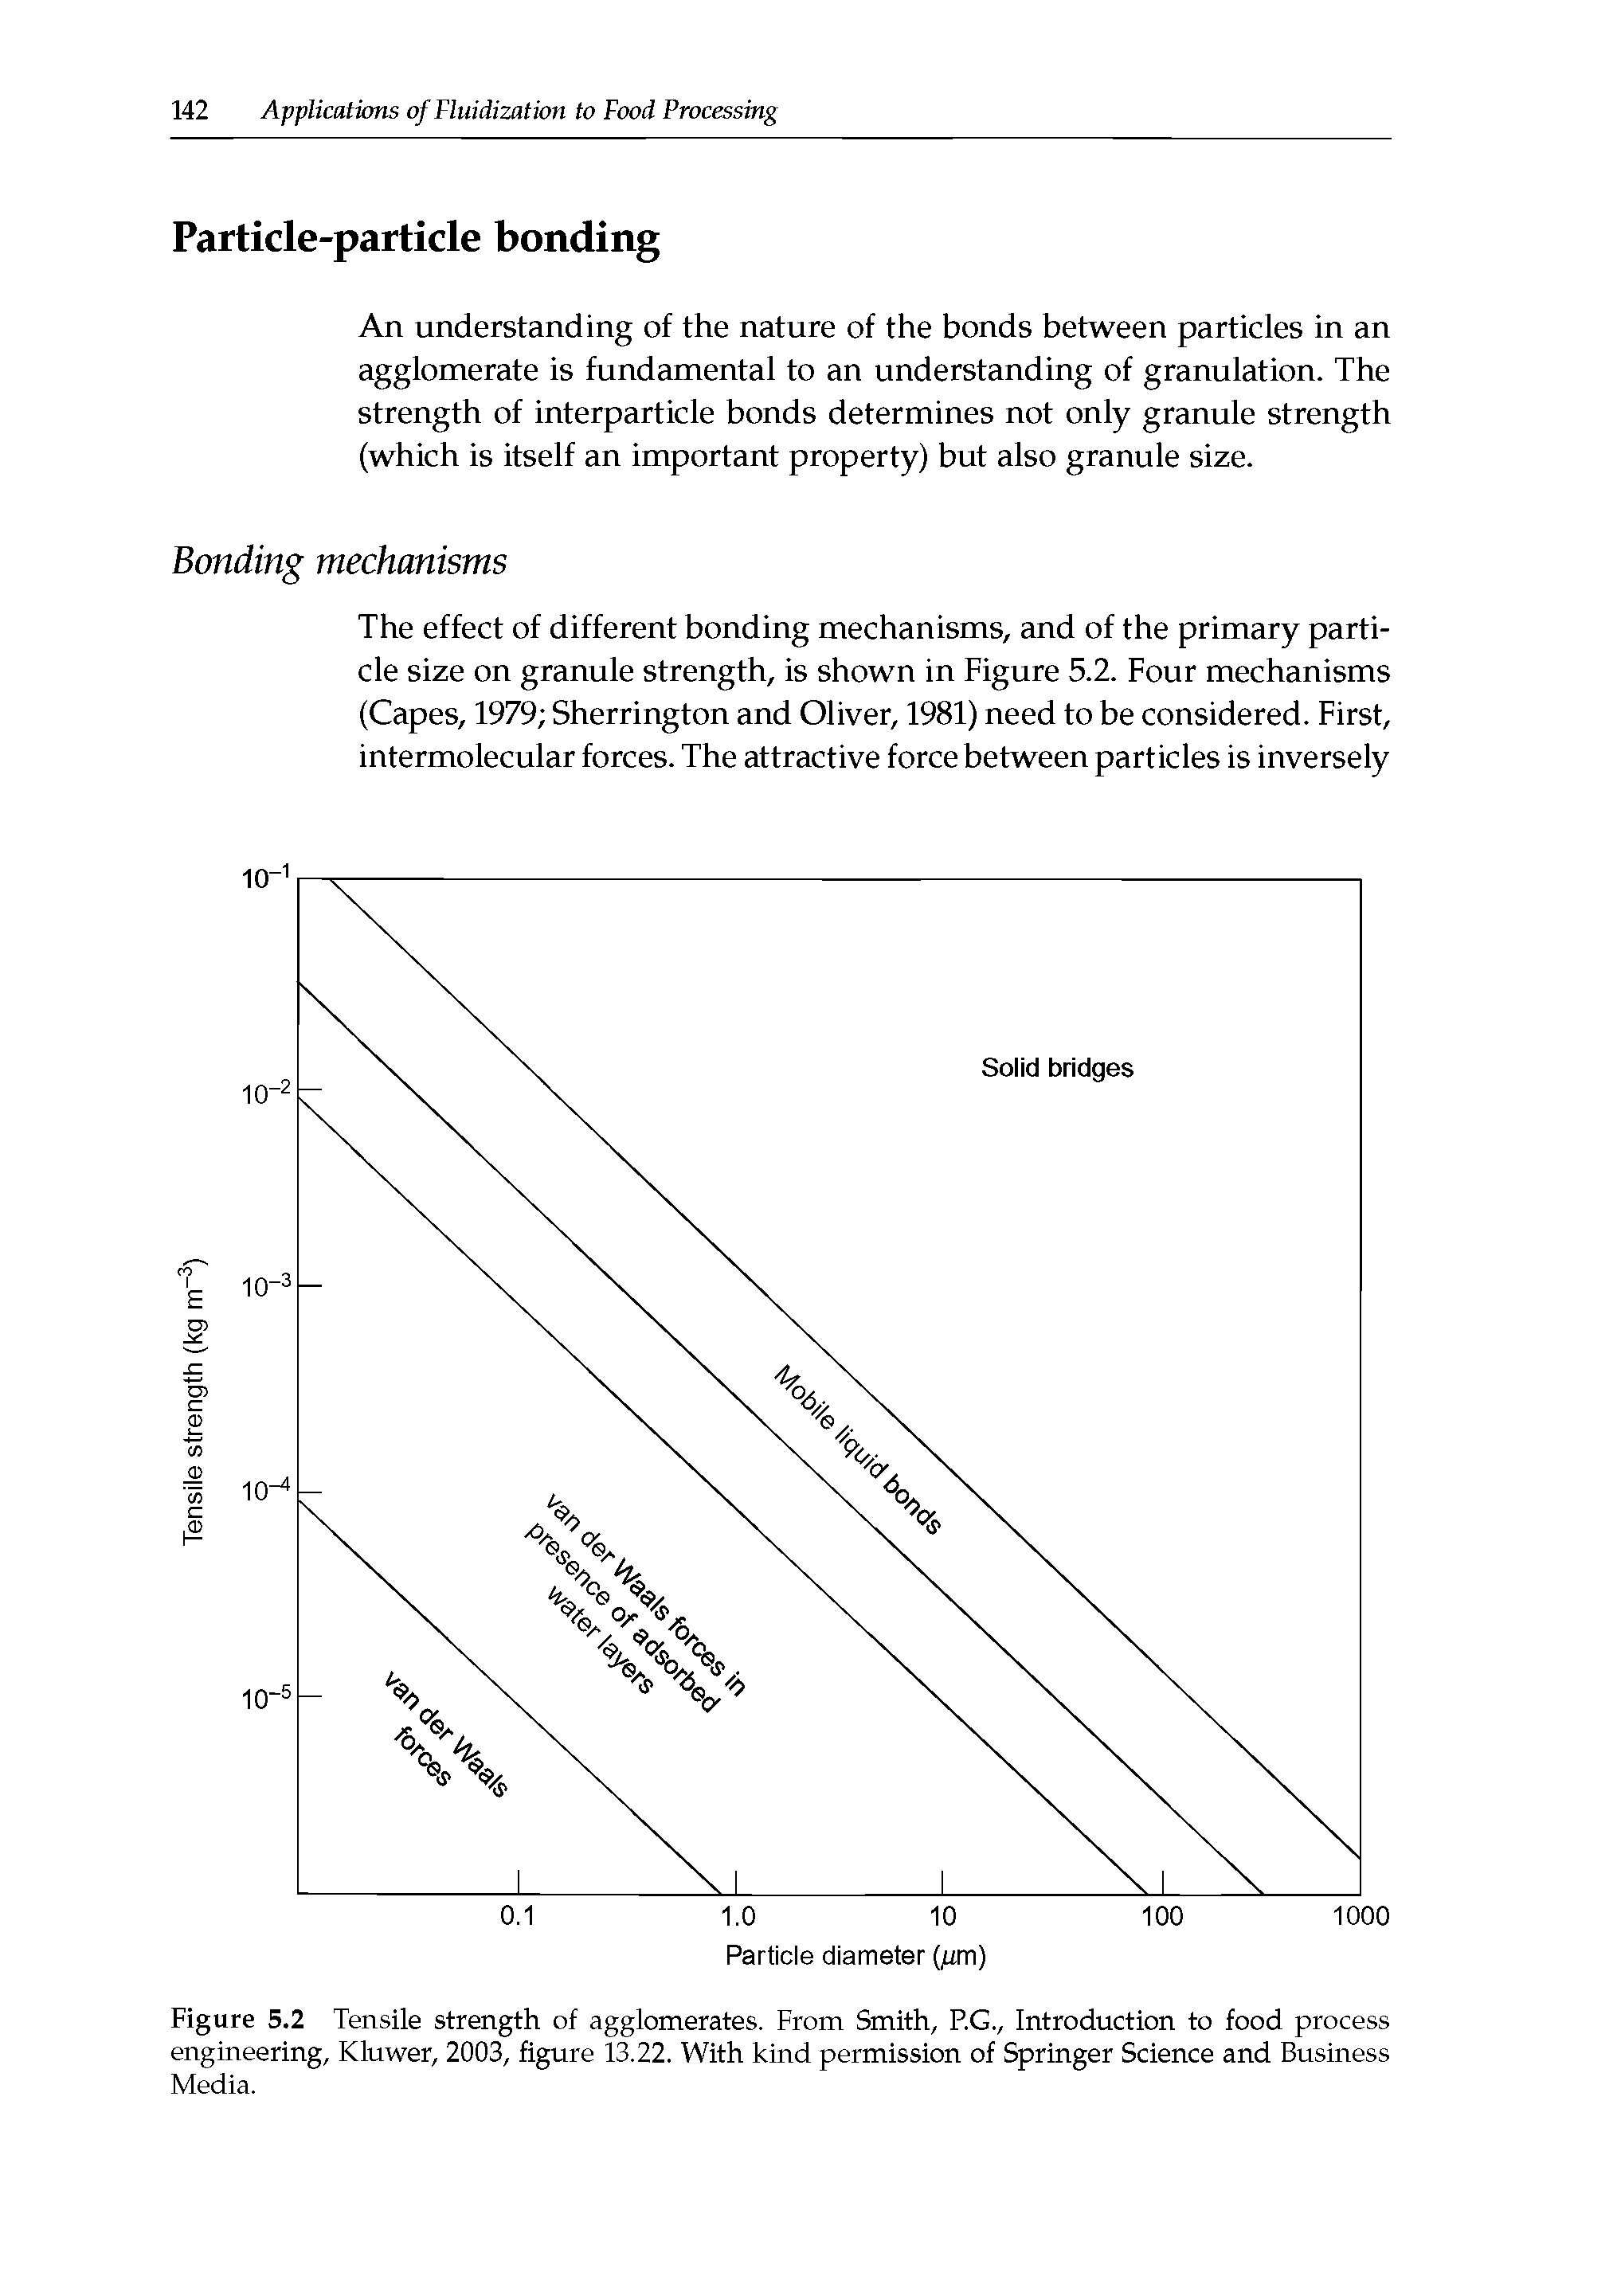 Figure 5.2 Tensile strength of agglomerates. From Smith, P.G., Introduction to food process engineering, Kluwer, 2003, figure 13.22. With kind permission of Springer Science and Business Media.